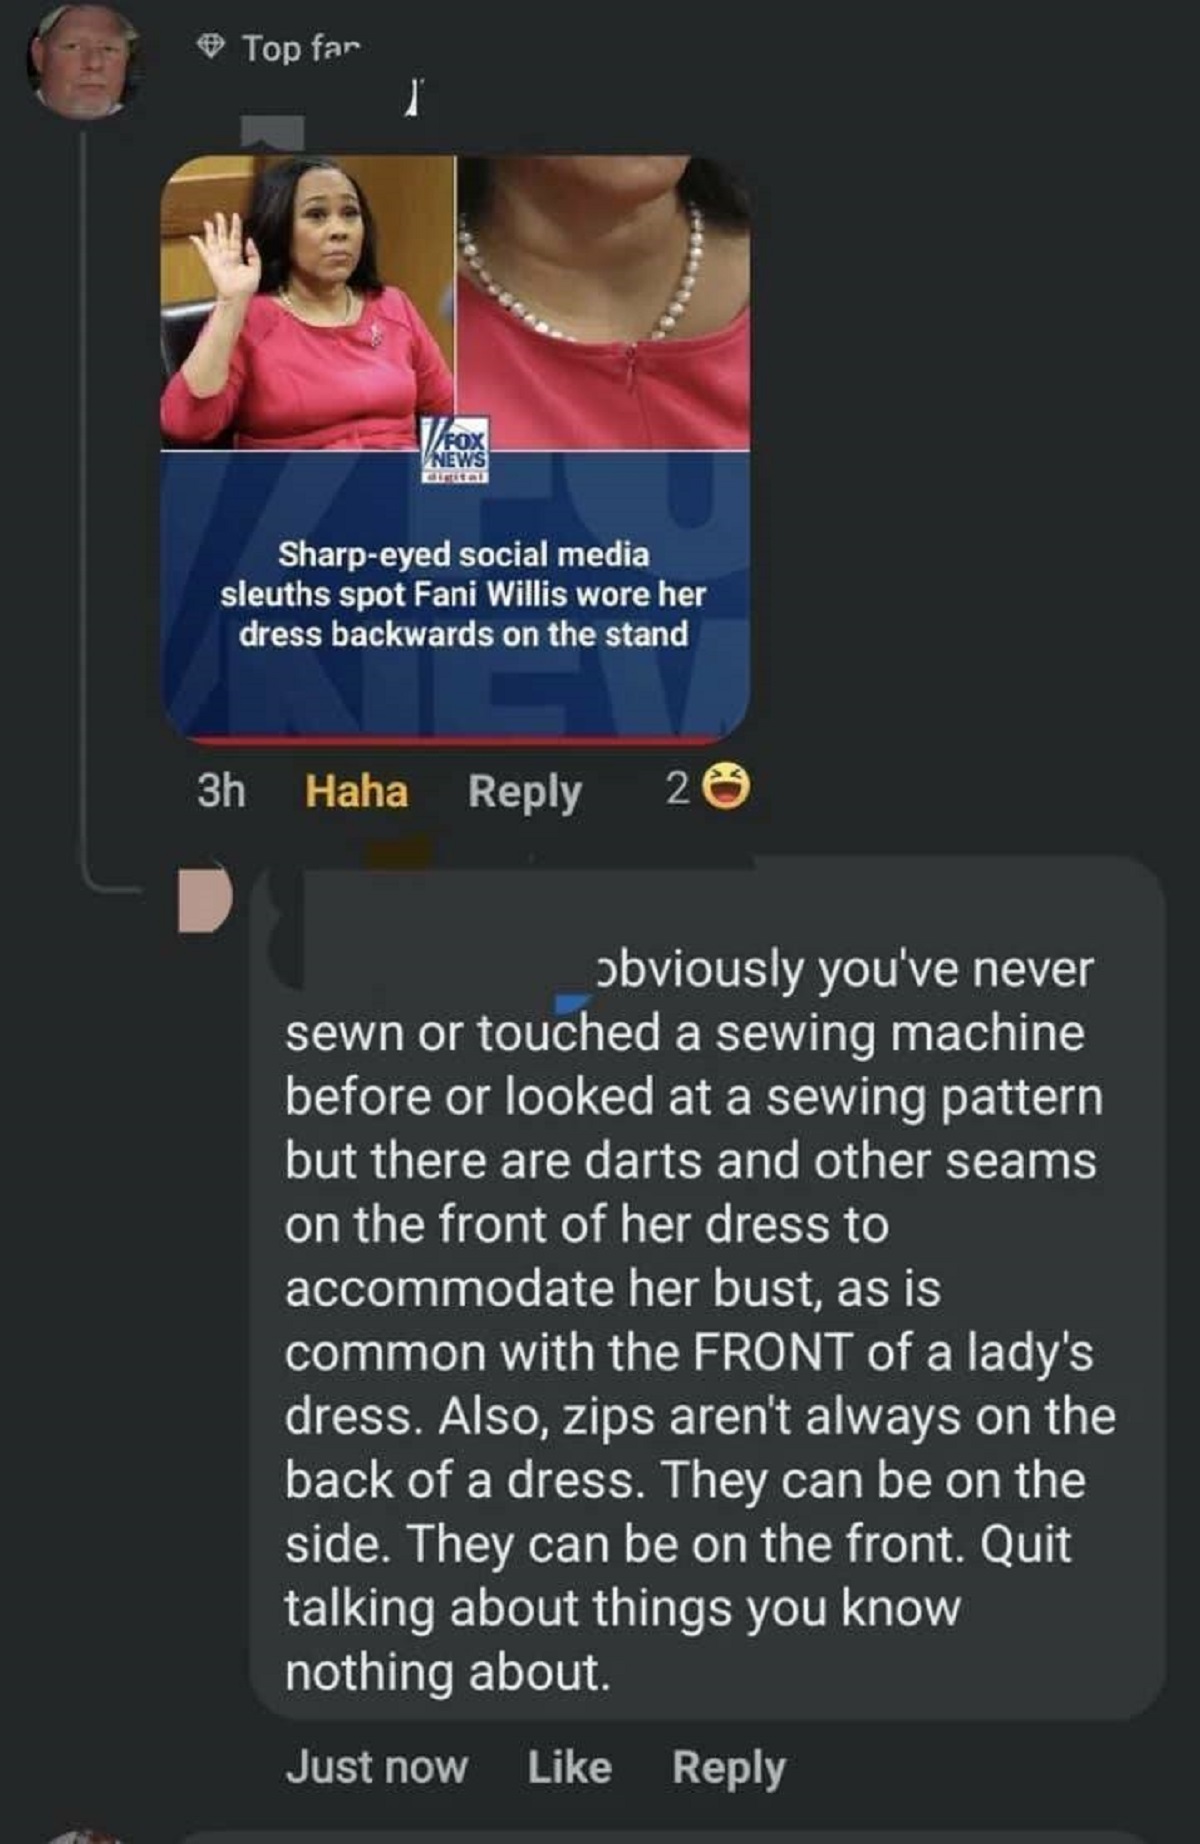 screenshot - Top far Fox News digital Sharpeyed social media sleuths spot Fani Willis wore her dress backwards on the stand 3h Haha 2 obviously you've never sewn or touched a sewing machine before or looked at a sewing pattern but there are darts and othe